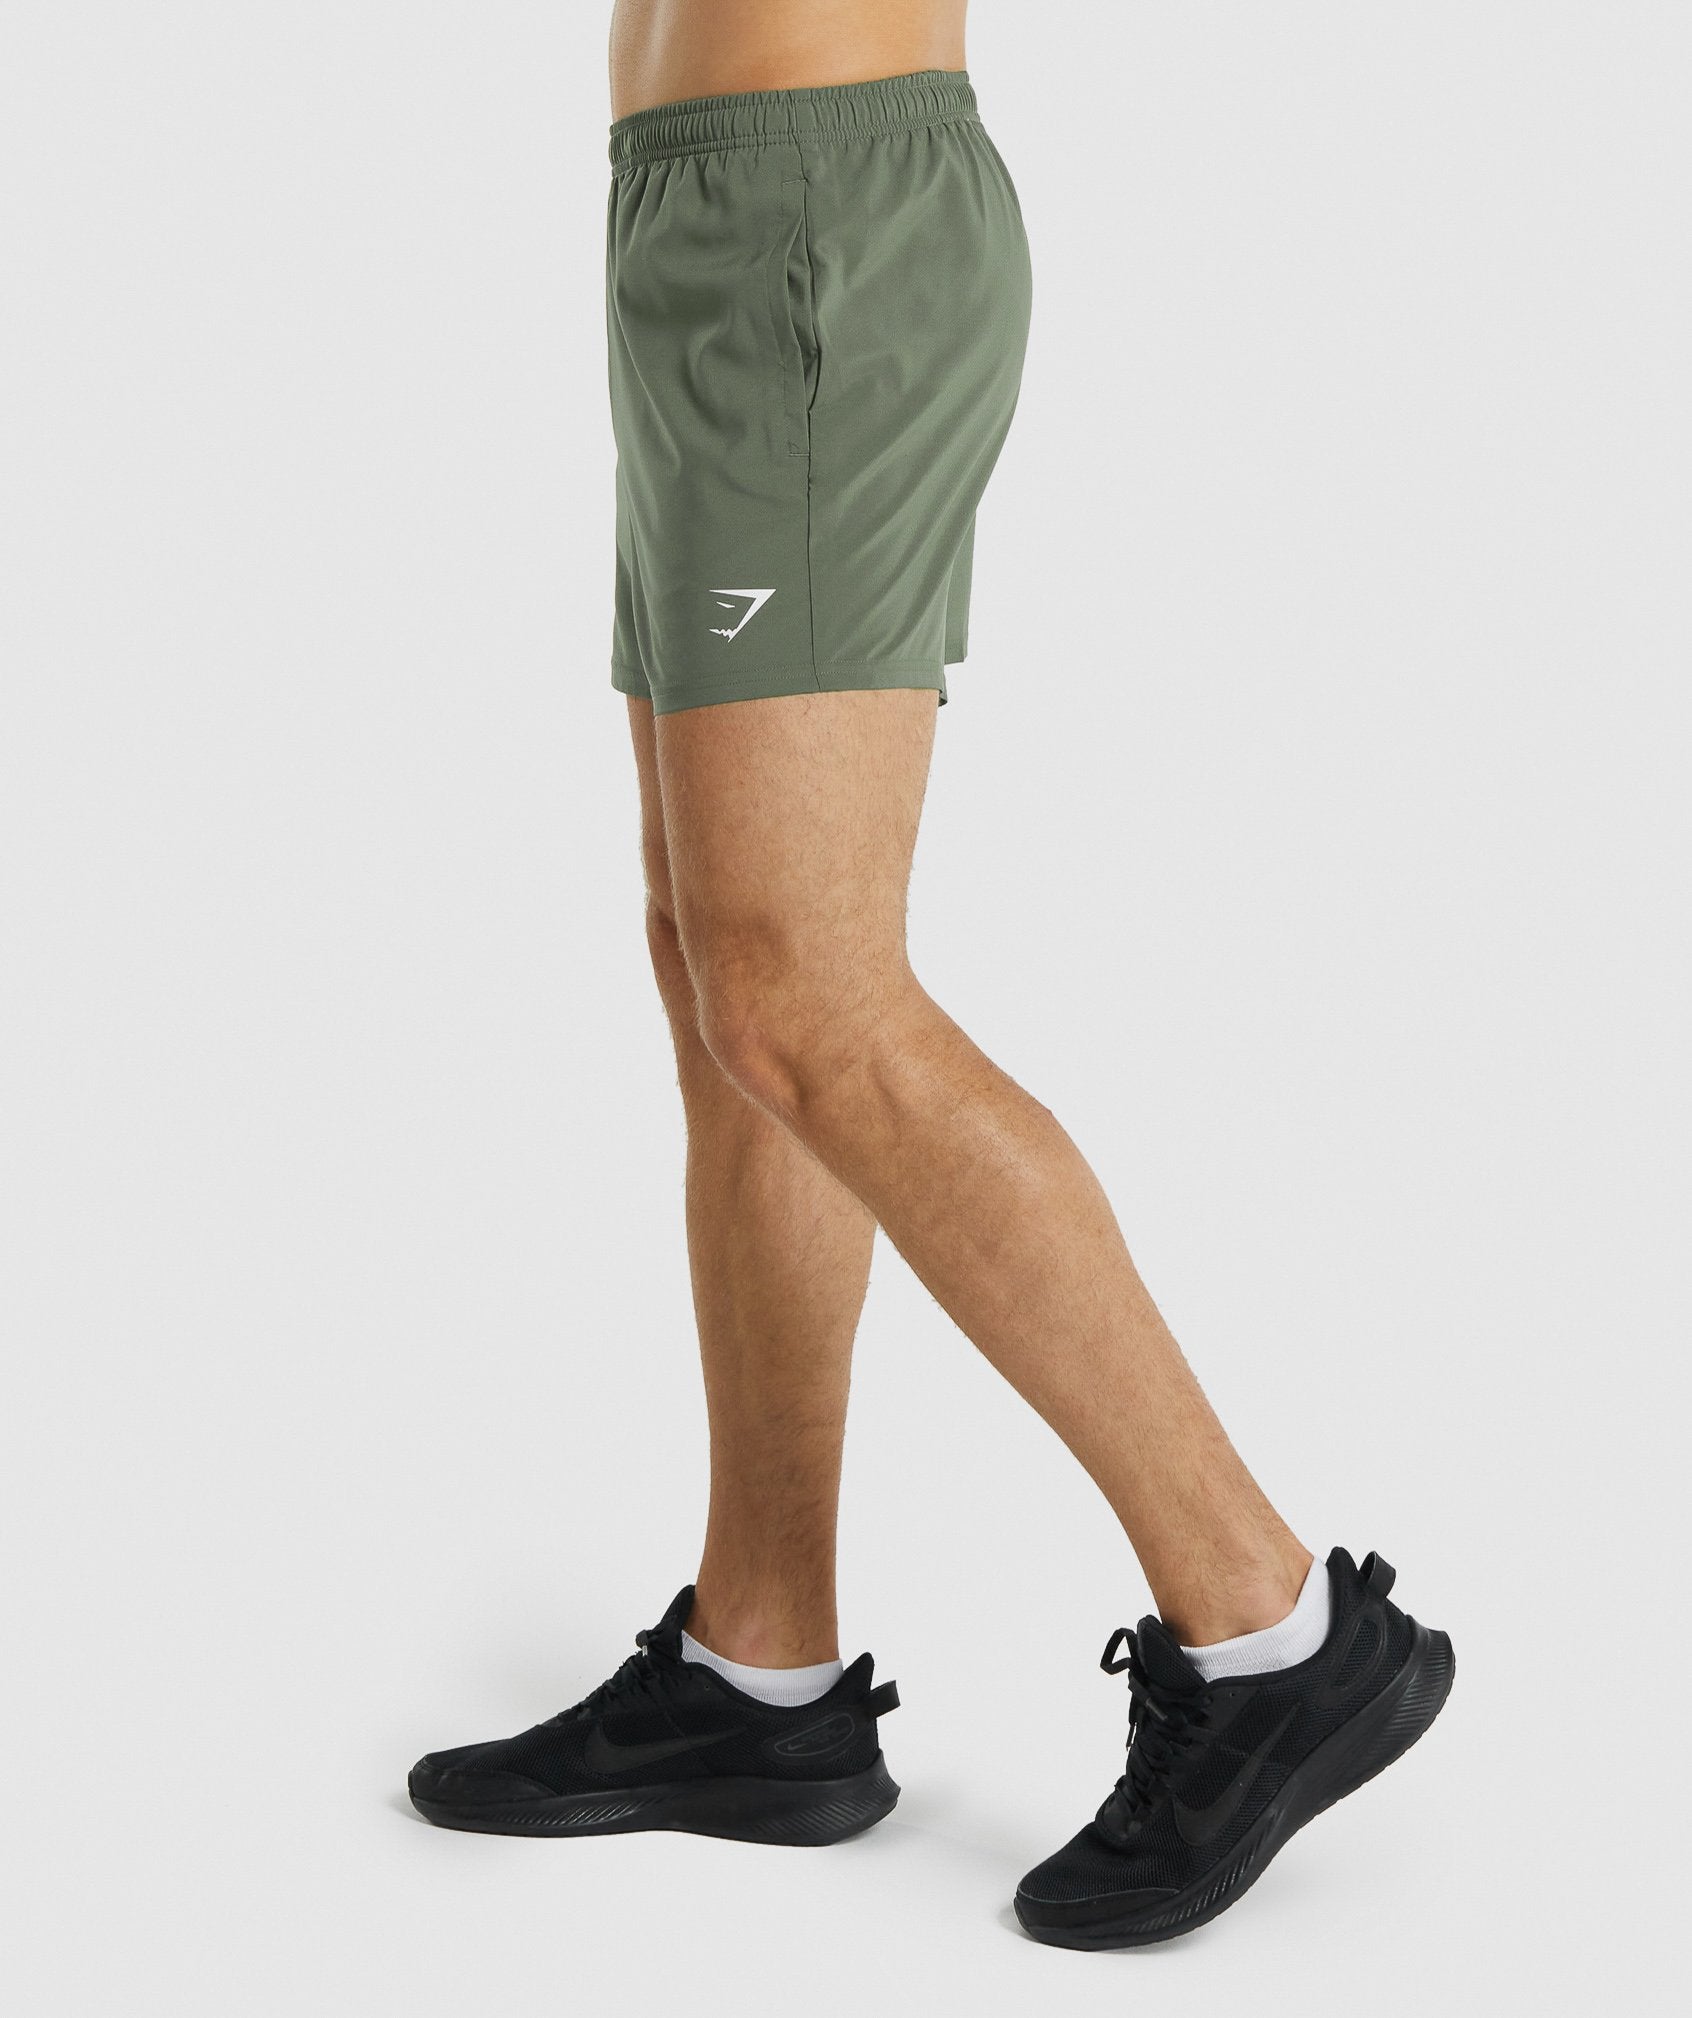 Arrival 5" Shorts in Green - view 3